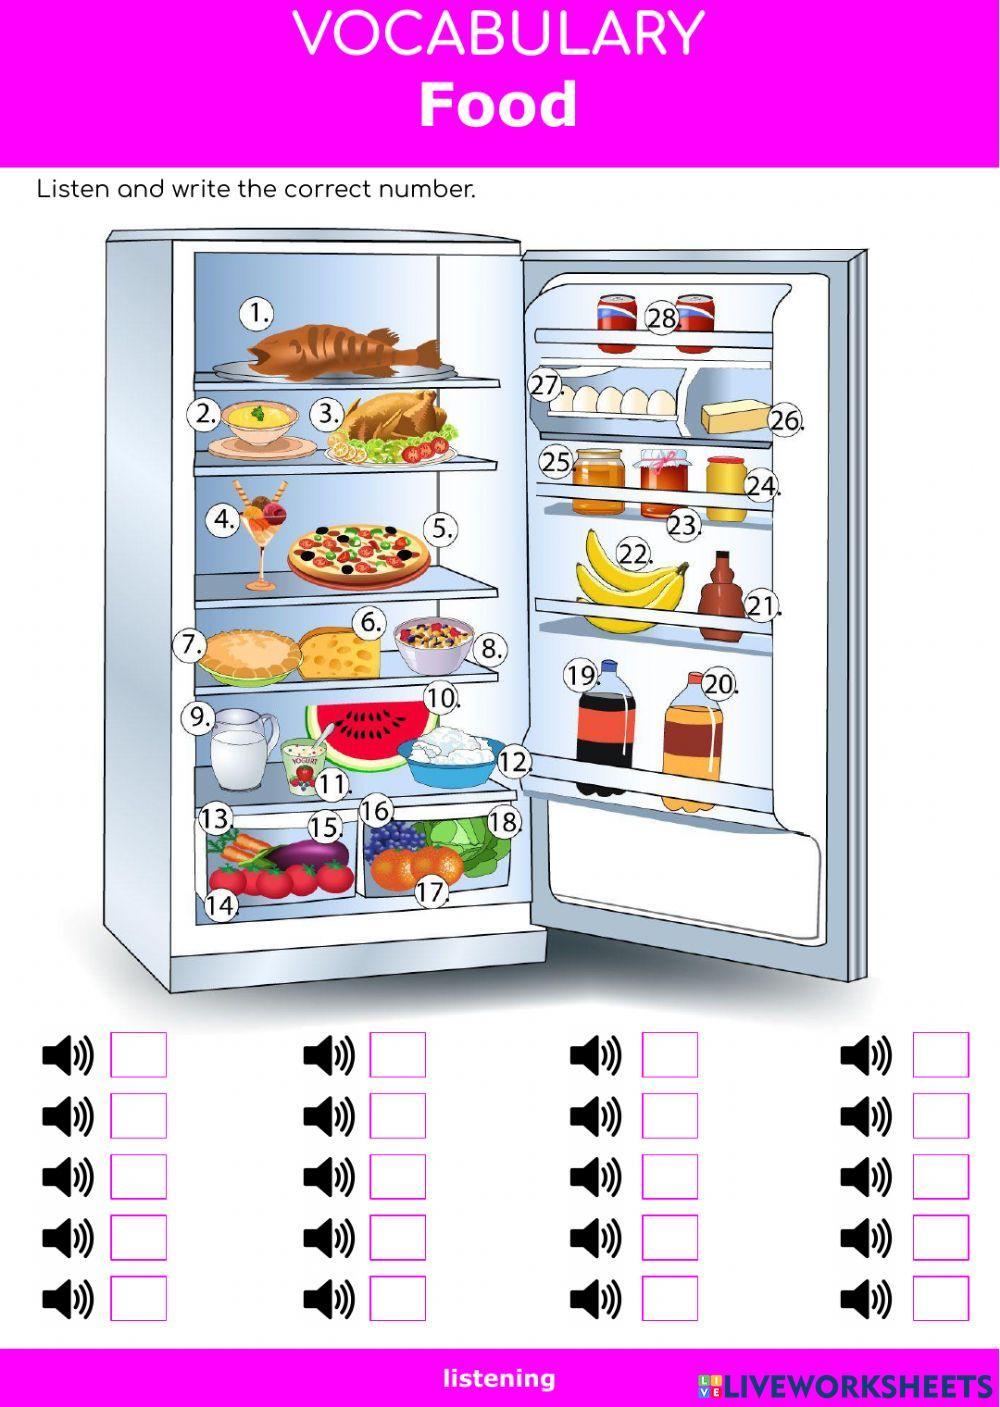 Food - What's in the fridge